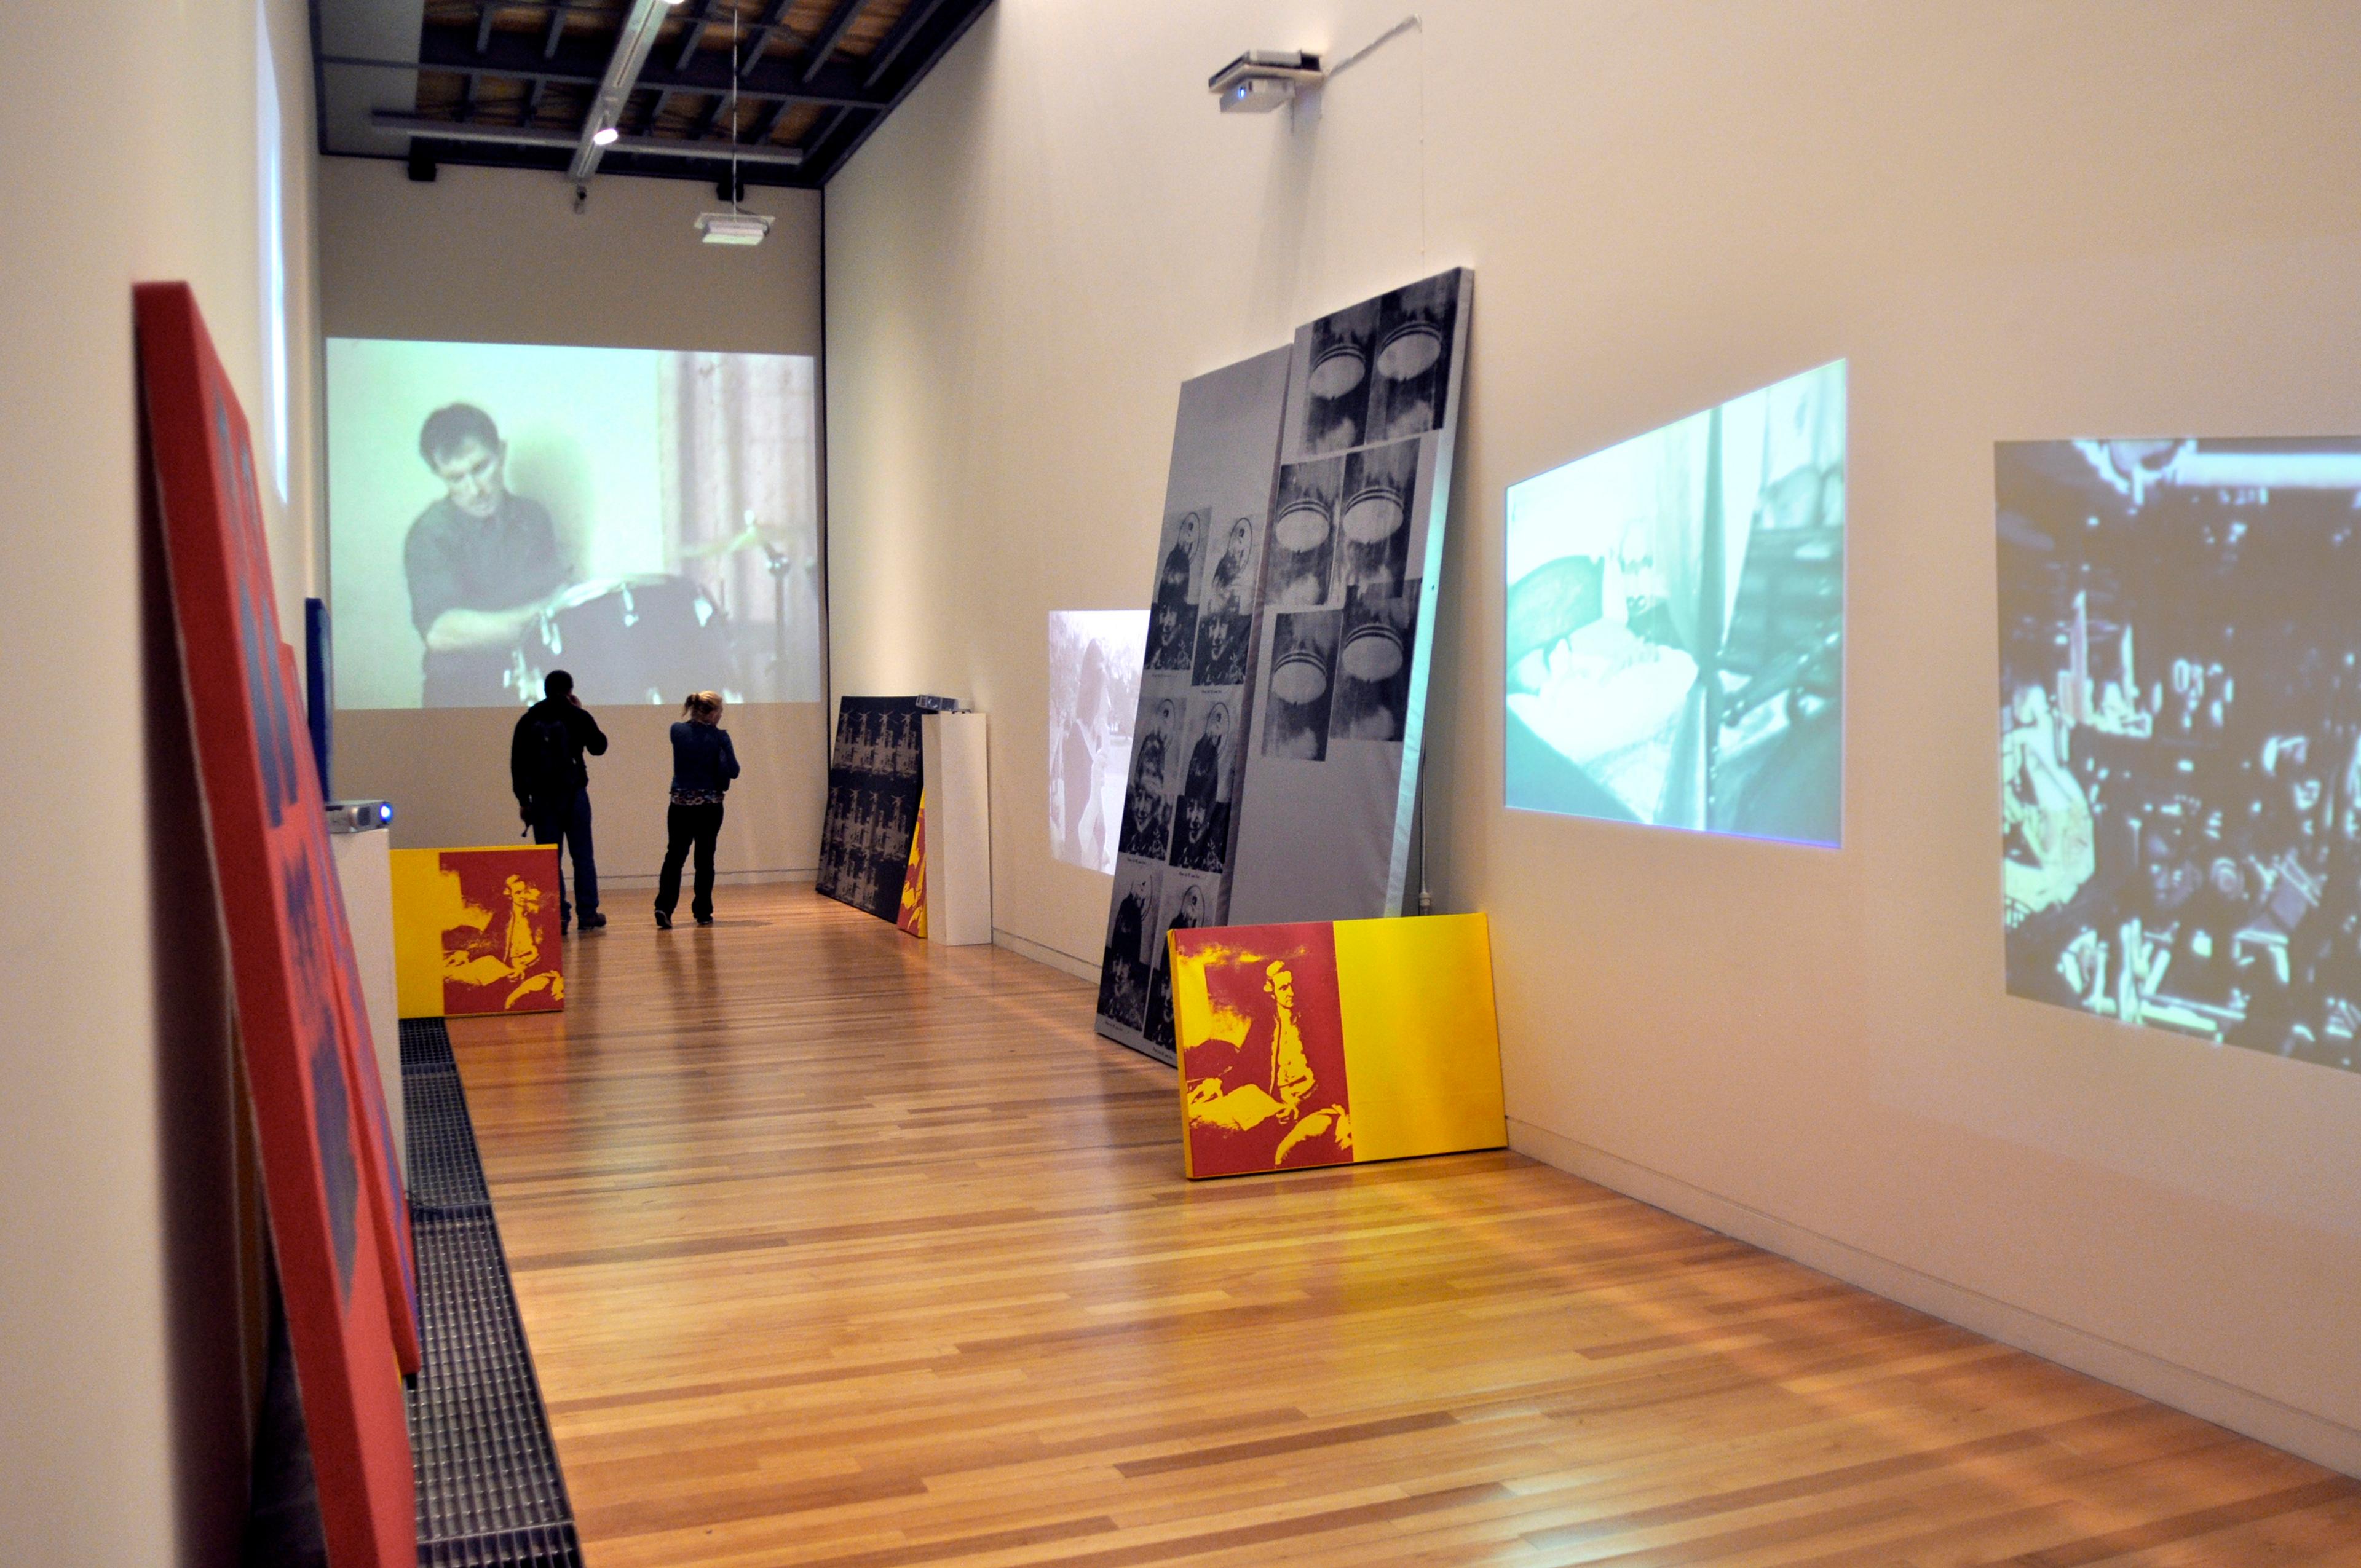 Ronnie van Hout, 1981- 1982, 2010. projected SD DVDs, silk screen inks on primed and painted stretched canvas. Installation view, Object Lessons: A Musical Fiction, Adam Art Gallery Te Pātaka Toi, Victoria University of Wellington. Photo: Michael Salmon